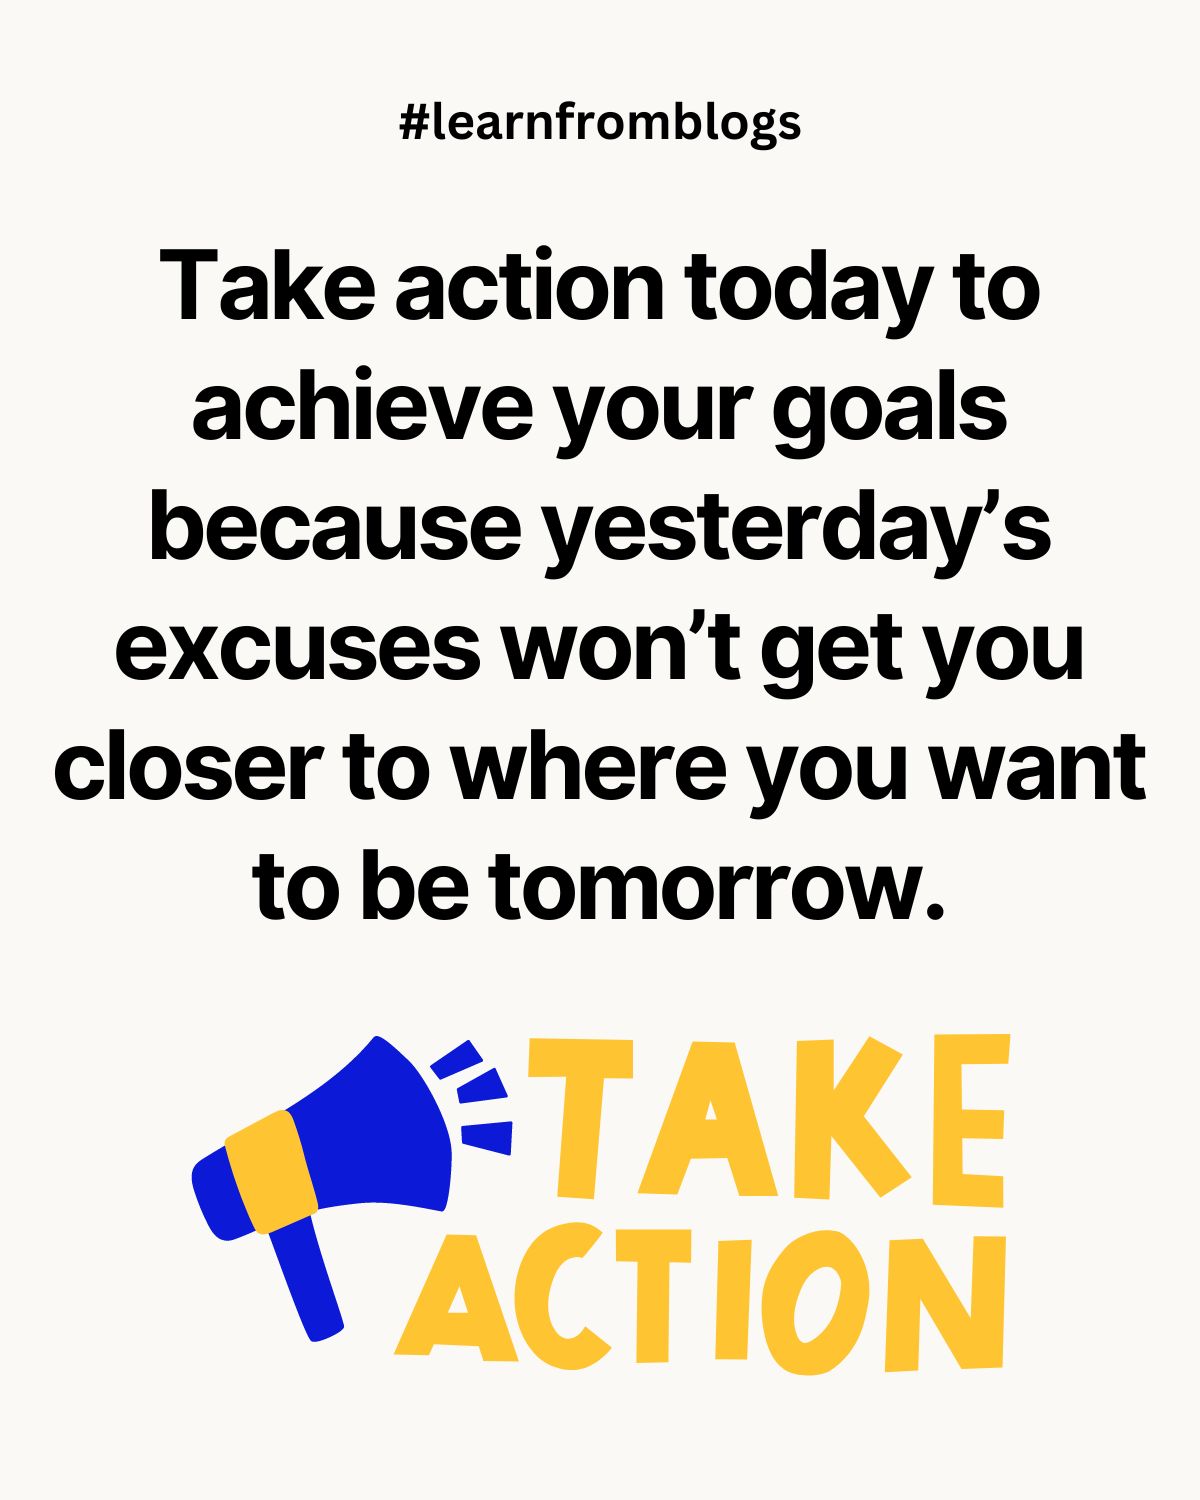 Take action today.jpg